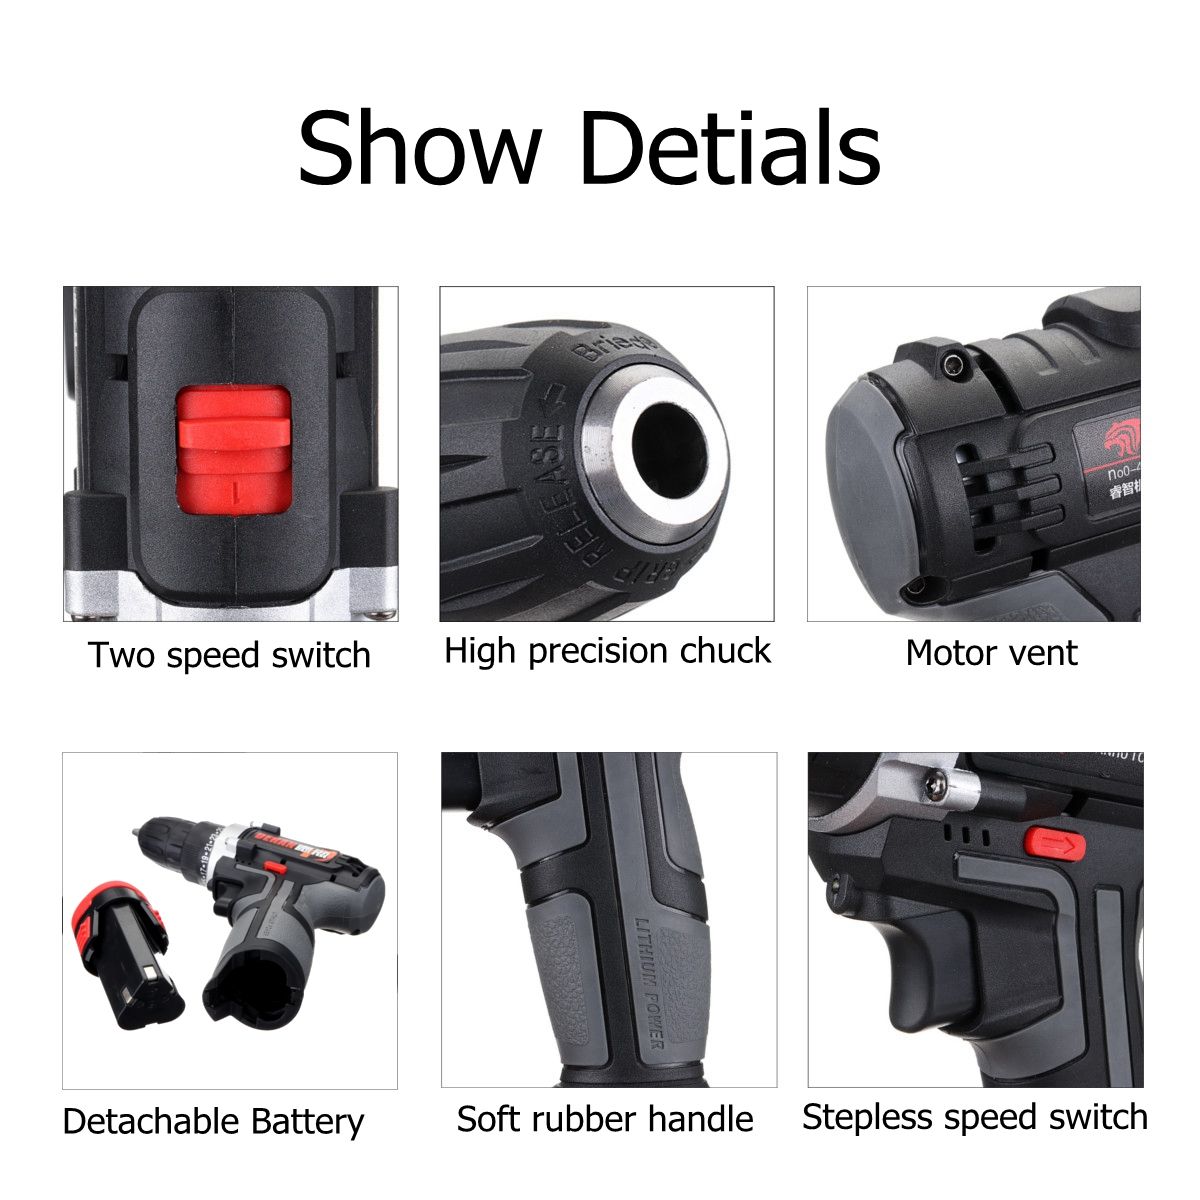 12V-Electric-Cordless-Power-Drill-Screwdriver-2-Speed-LED-Lighting-W-1or-2-Battery-1421394